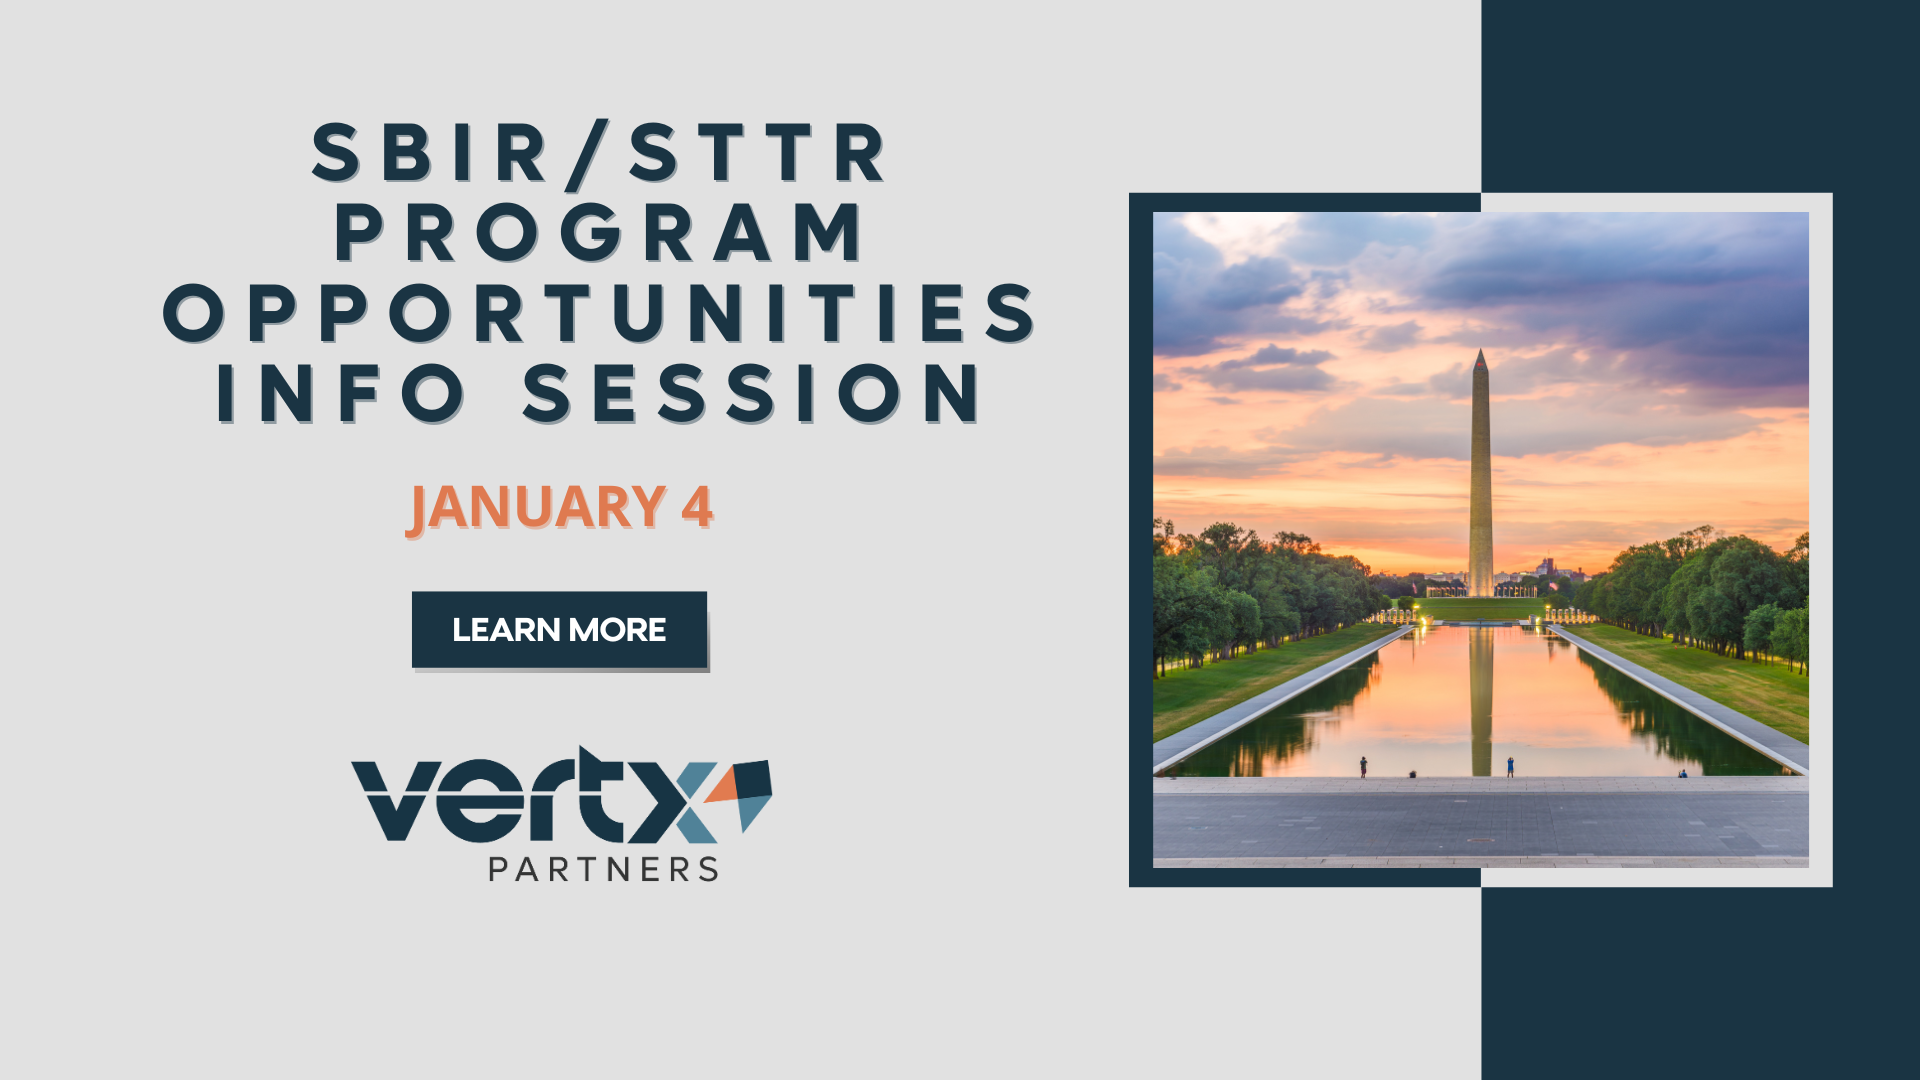 This graphic has the title "SBIR/STTR Program Opportunities Info Session" with the date January 4th under it and a photo of the capital to the right of it with a sunset in the background